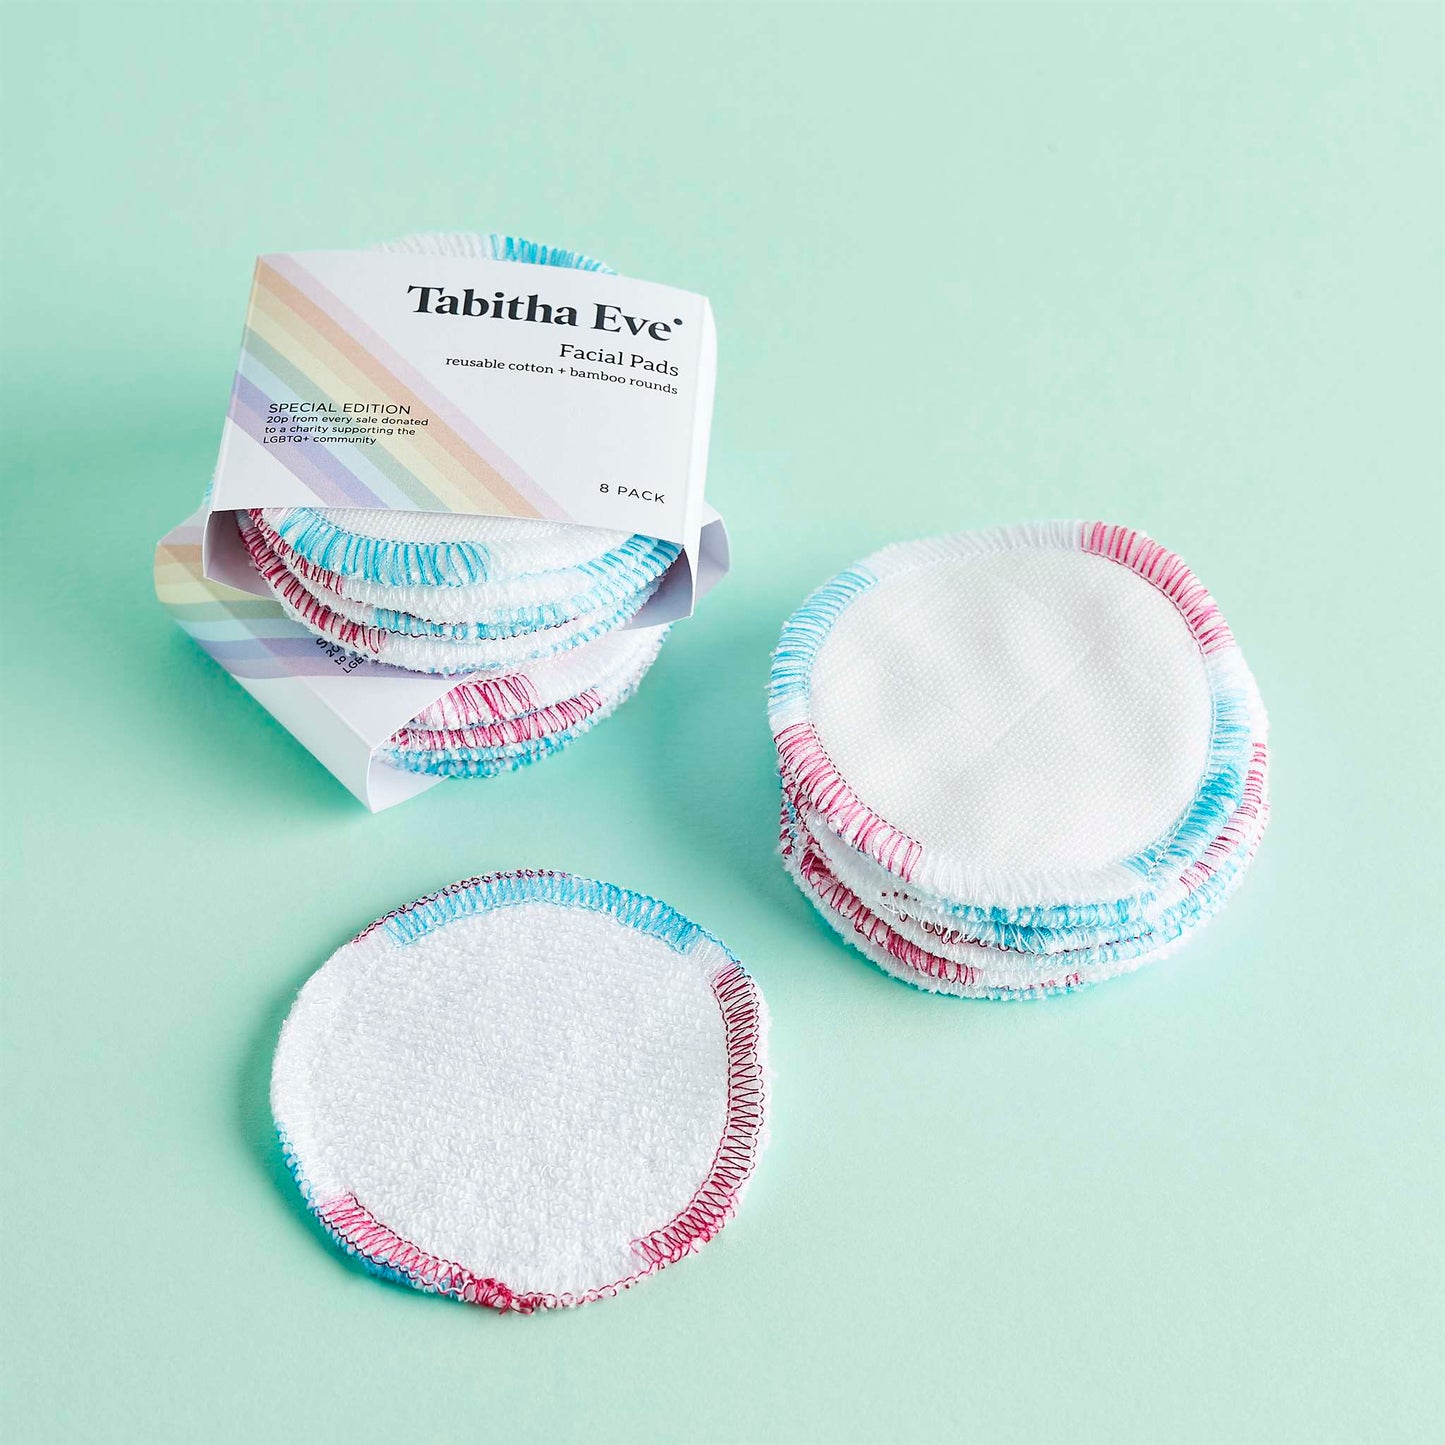 Tabitha Eve Makeup Removers Trans Pride Facial Rounds - Pack of 8